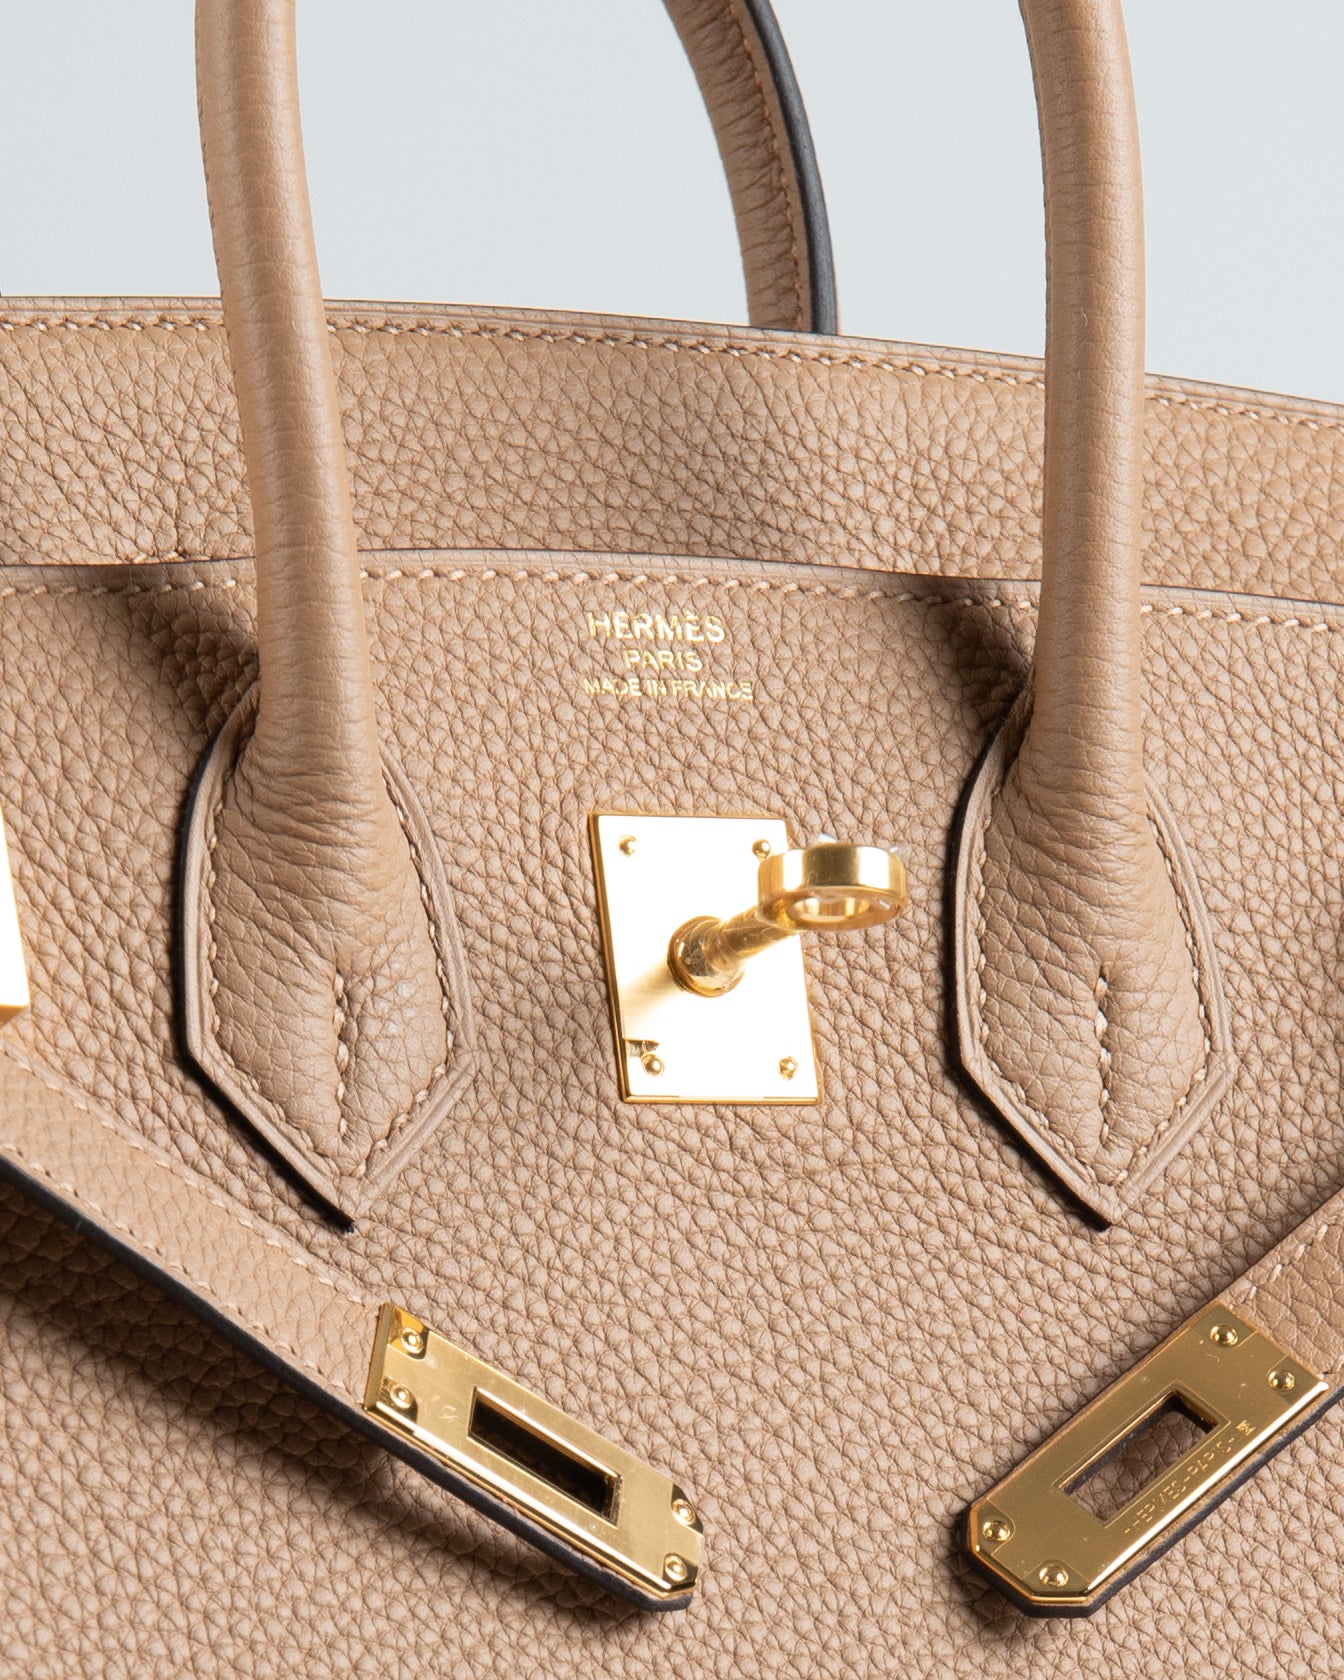 A GOLD TOGO LEATHER BIRKIN 25 WITH GOLD HARDWARE